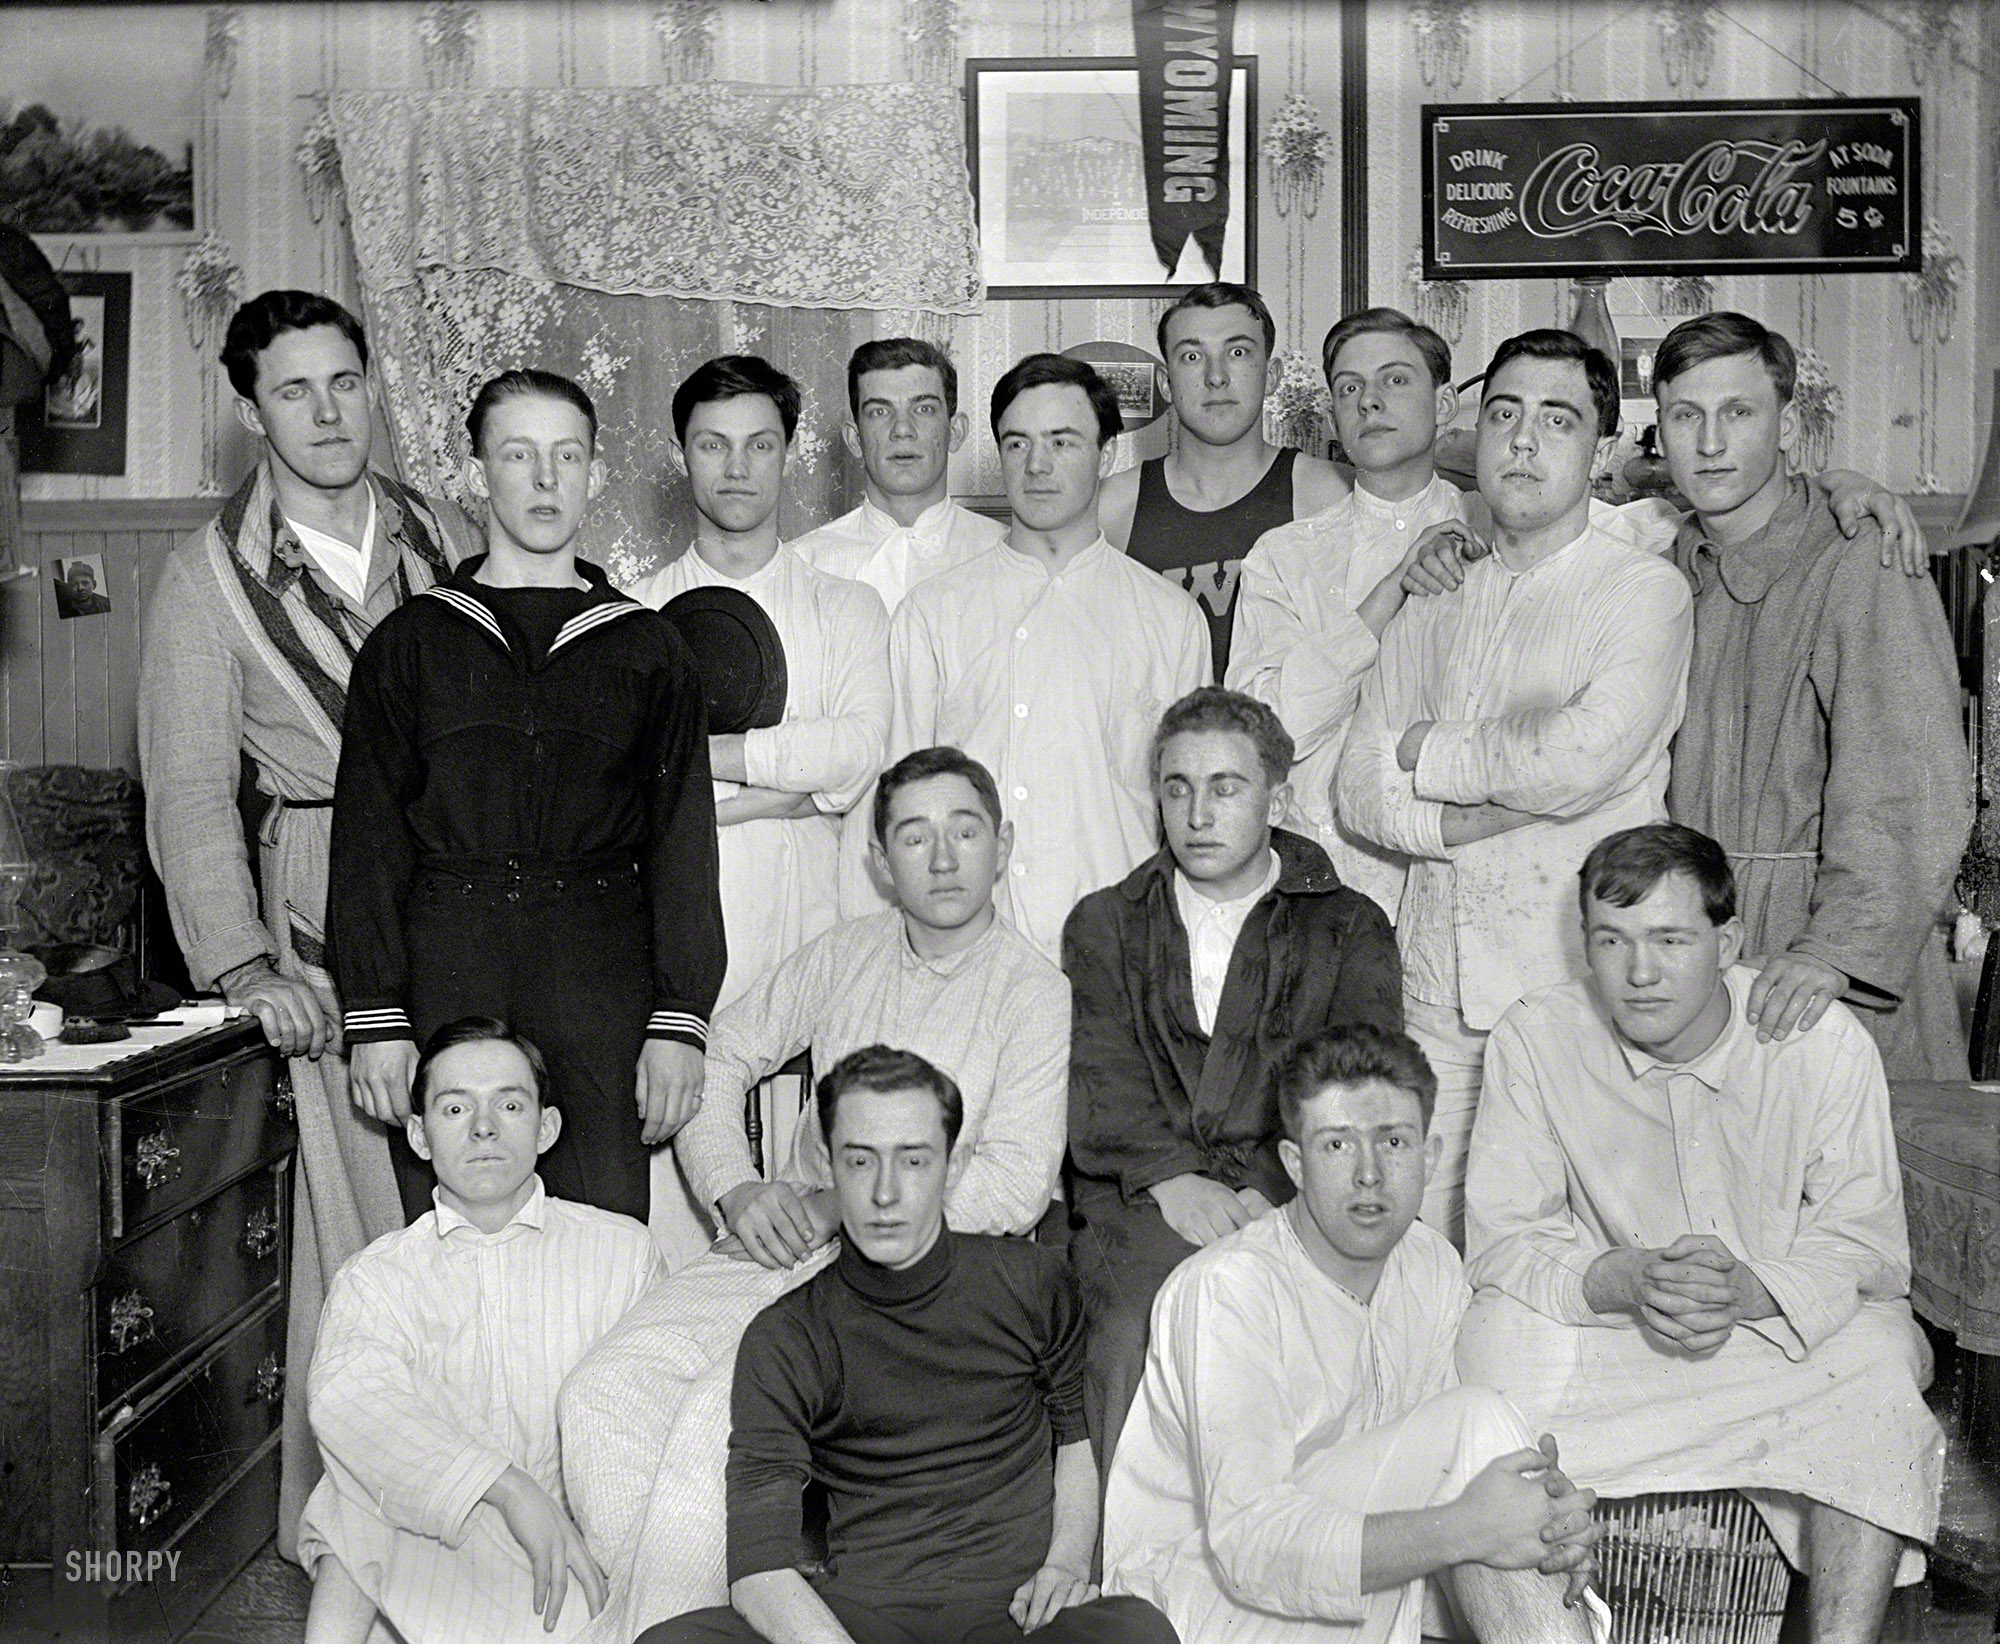 From the early 1900s comes this nightshirted posse of college men, possibly in Wyoming. Three cheers for old Pimento U! 4x5 glass negative. View full size.